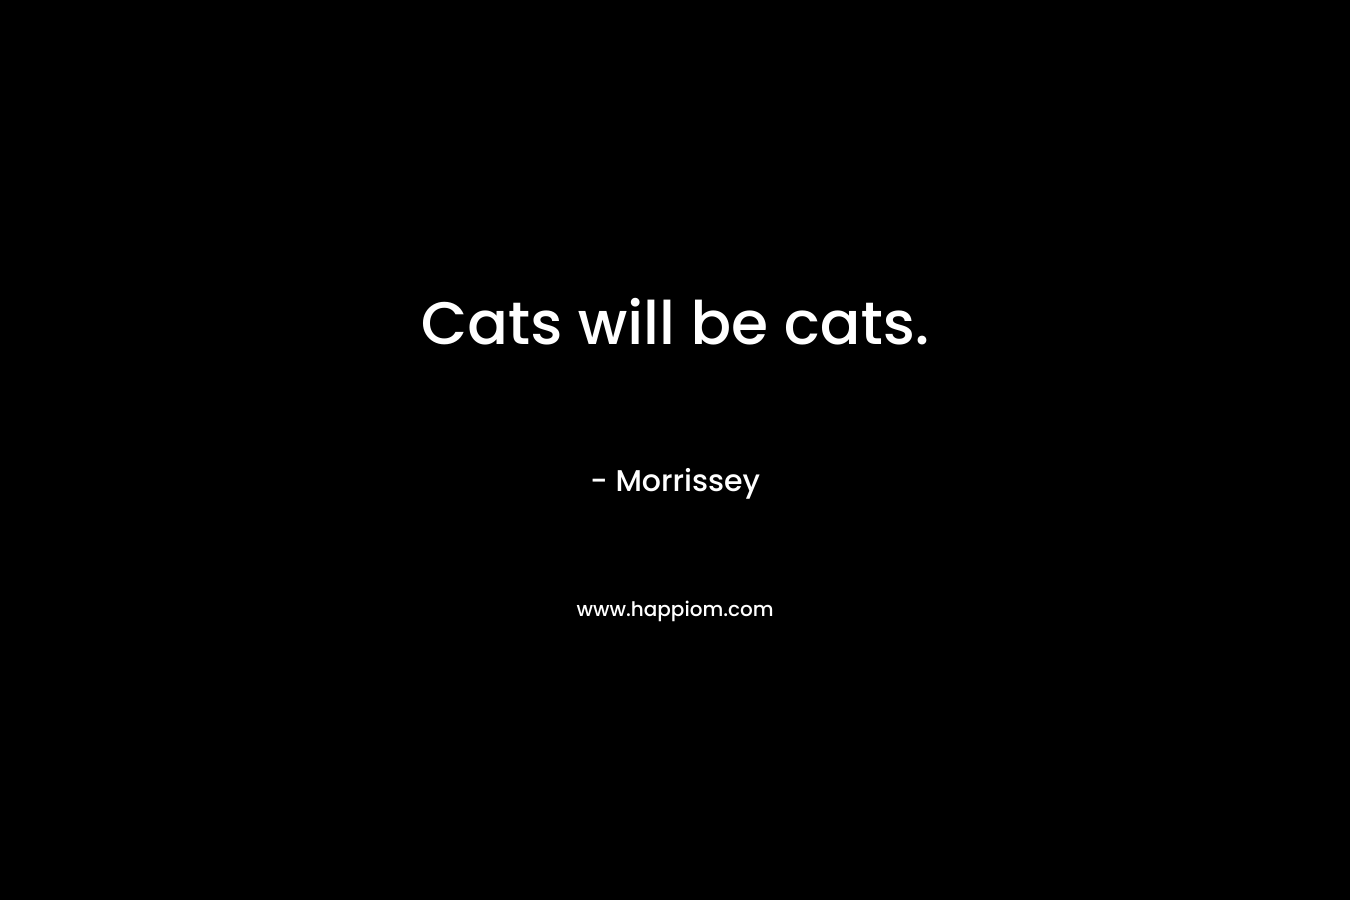 Cats will be cats. – Morrissey